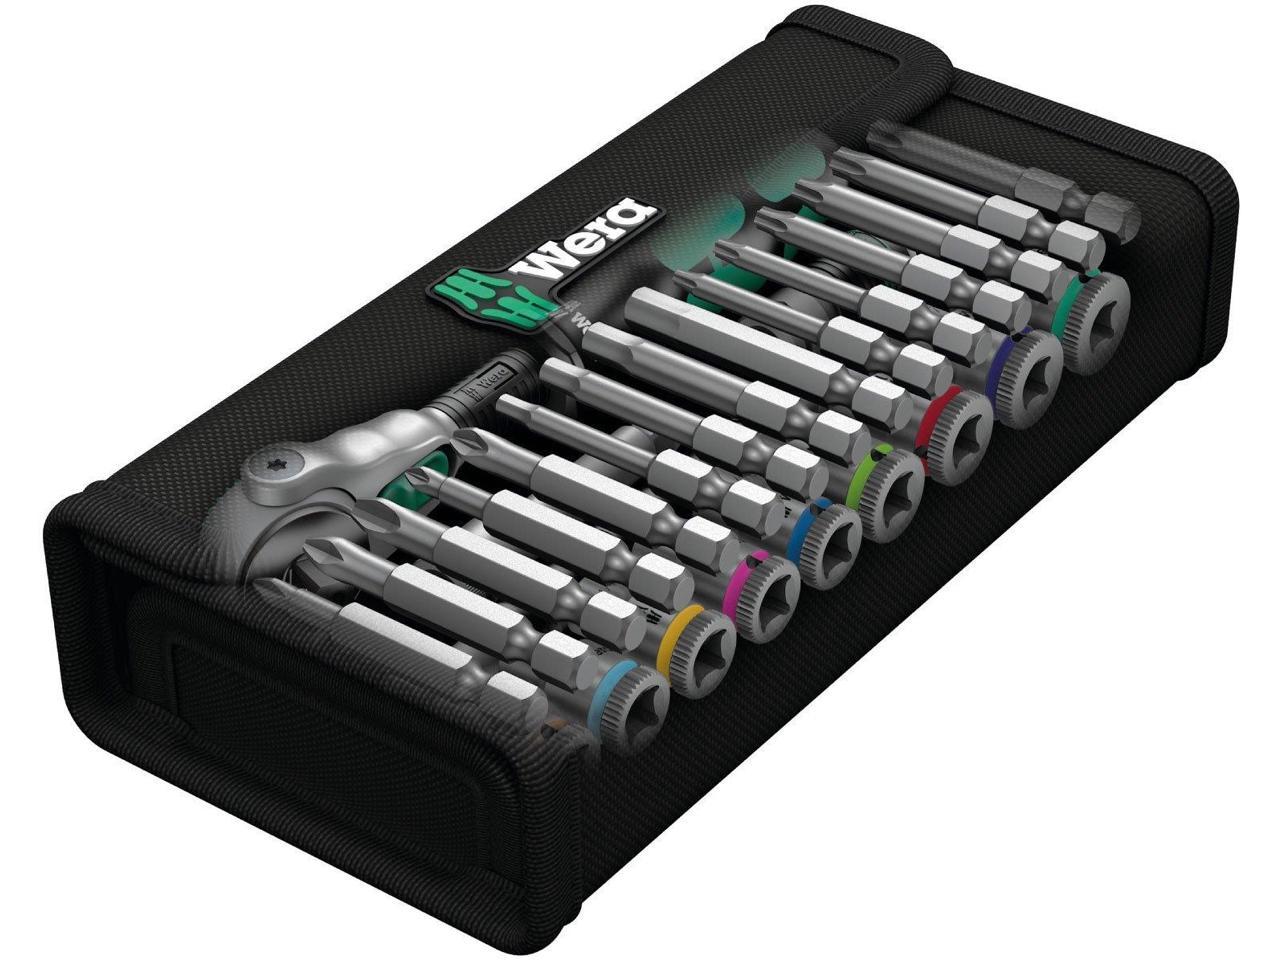 Wera 8100 SA 9 Zyklop Speed Ratchet Set 1/4" Drive Imperial 05004019001 for sale online